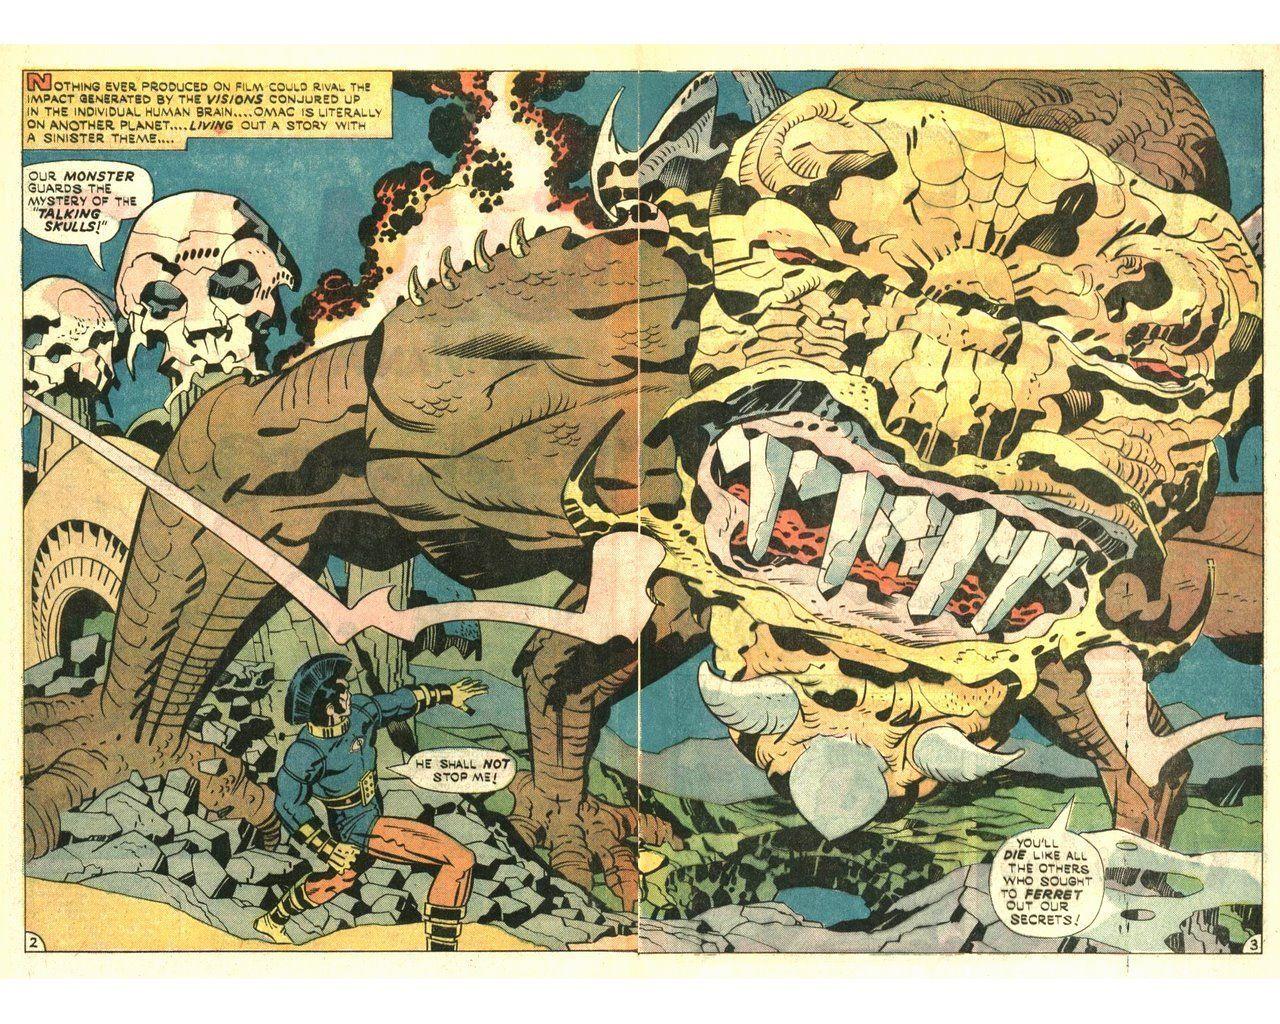 Jack Kirby: Master of Strange. a lay of the land